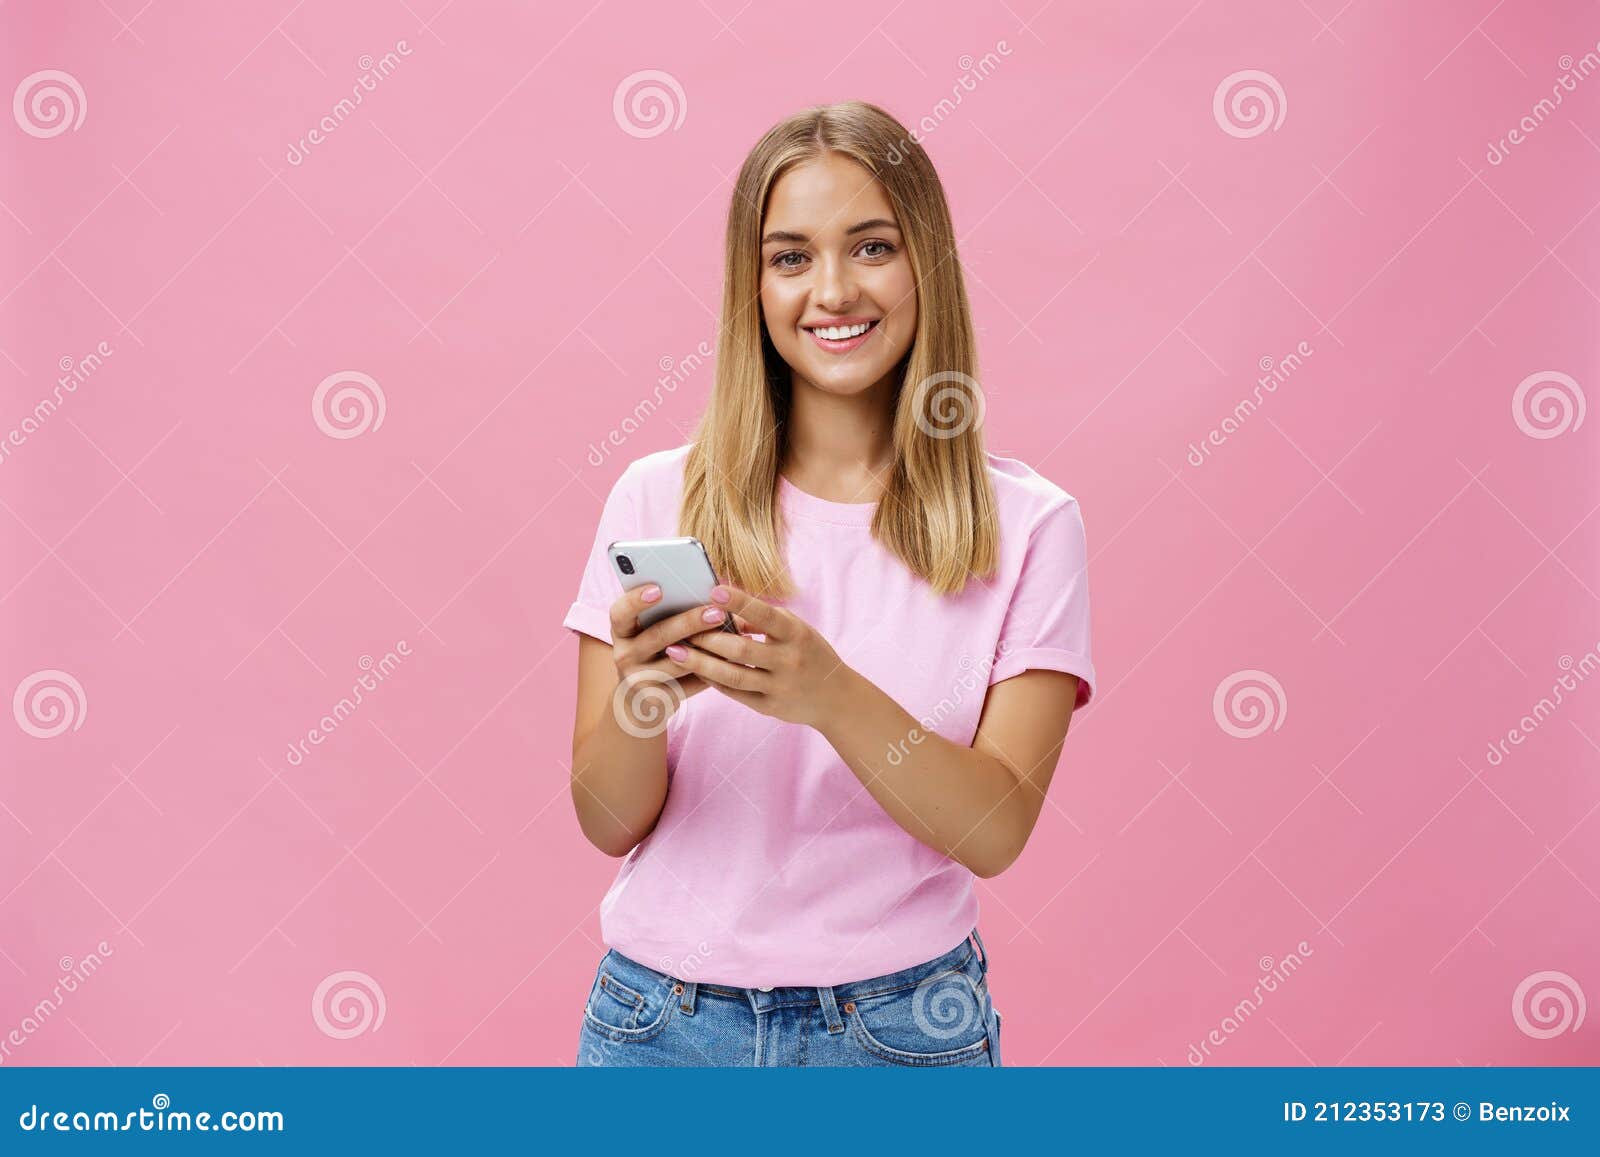 woman calling taxy via smartphone asking friend address smiling cheerfully at camera holding phone with both hands over